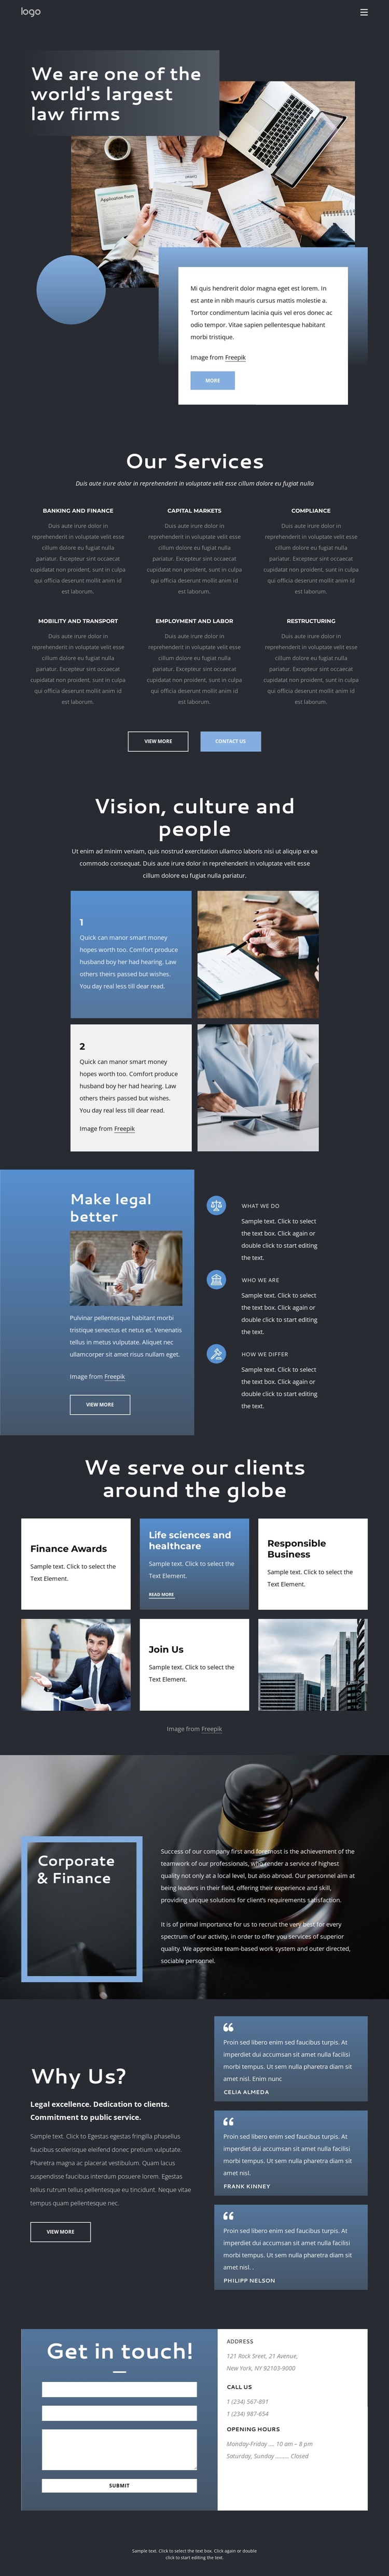 We are an elite law firm Joomla Template